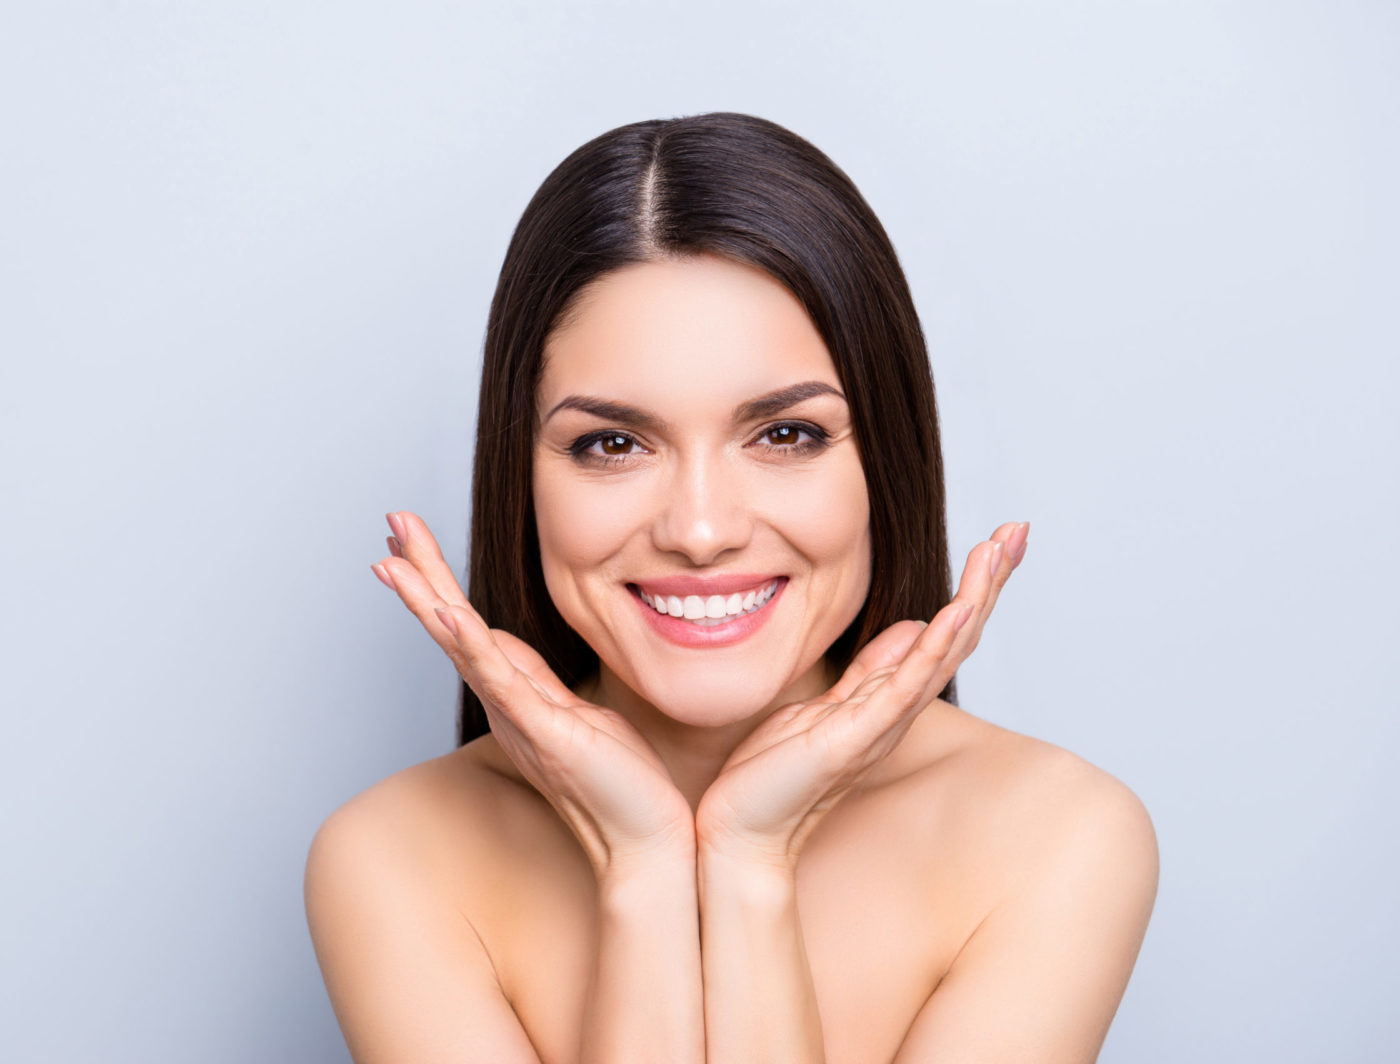 Choosing The Types Of Collagen That Are Right For You